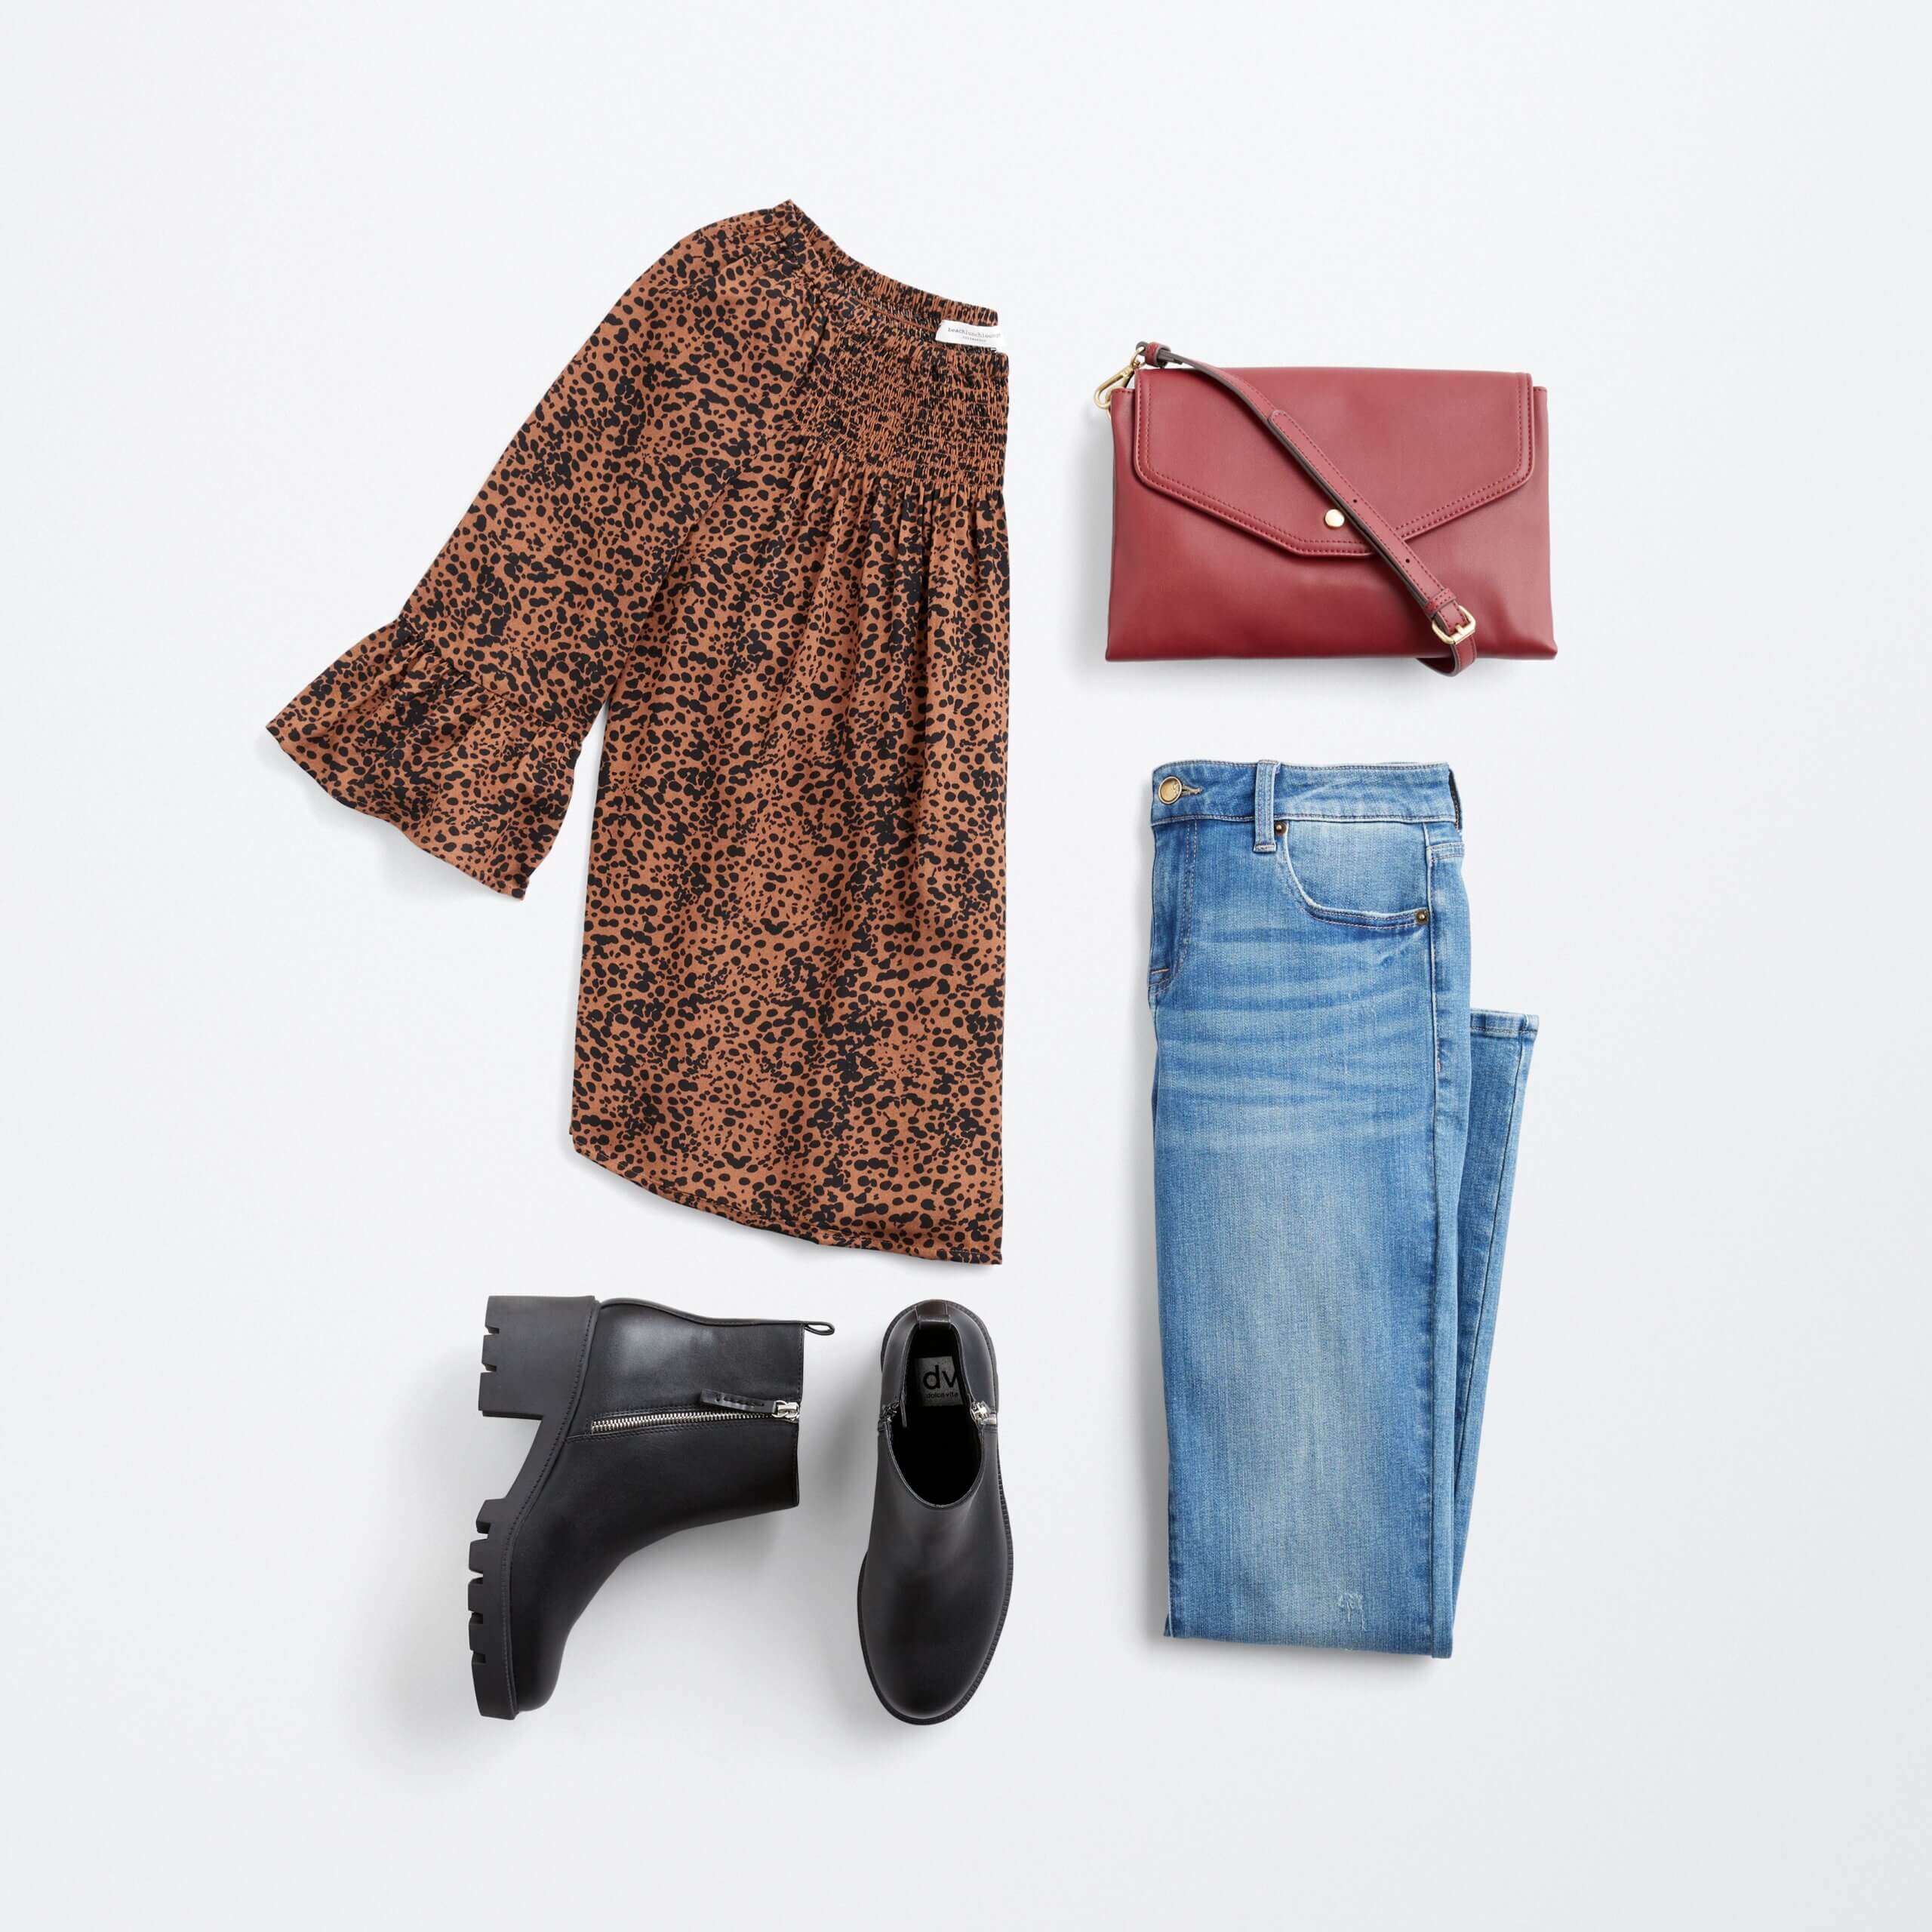 Stitch Fix women's outfit laydown featuring brown off-the-shoulder peasant top, black lug-sol booties, light wash jeans and red crossbody bag. 